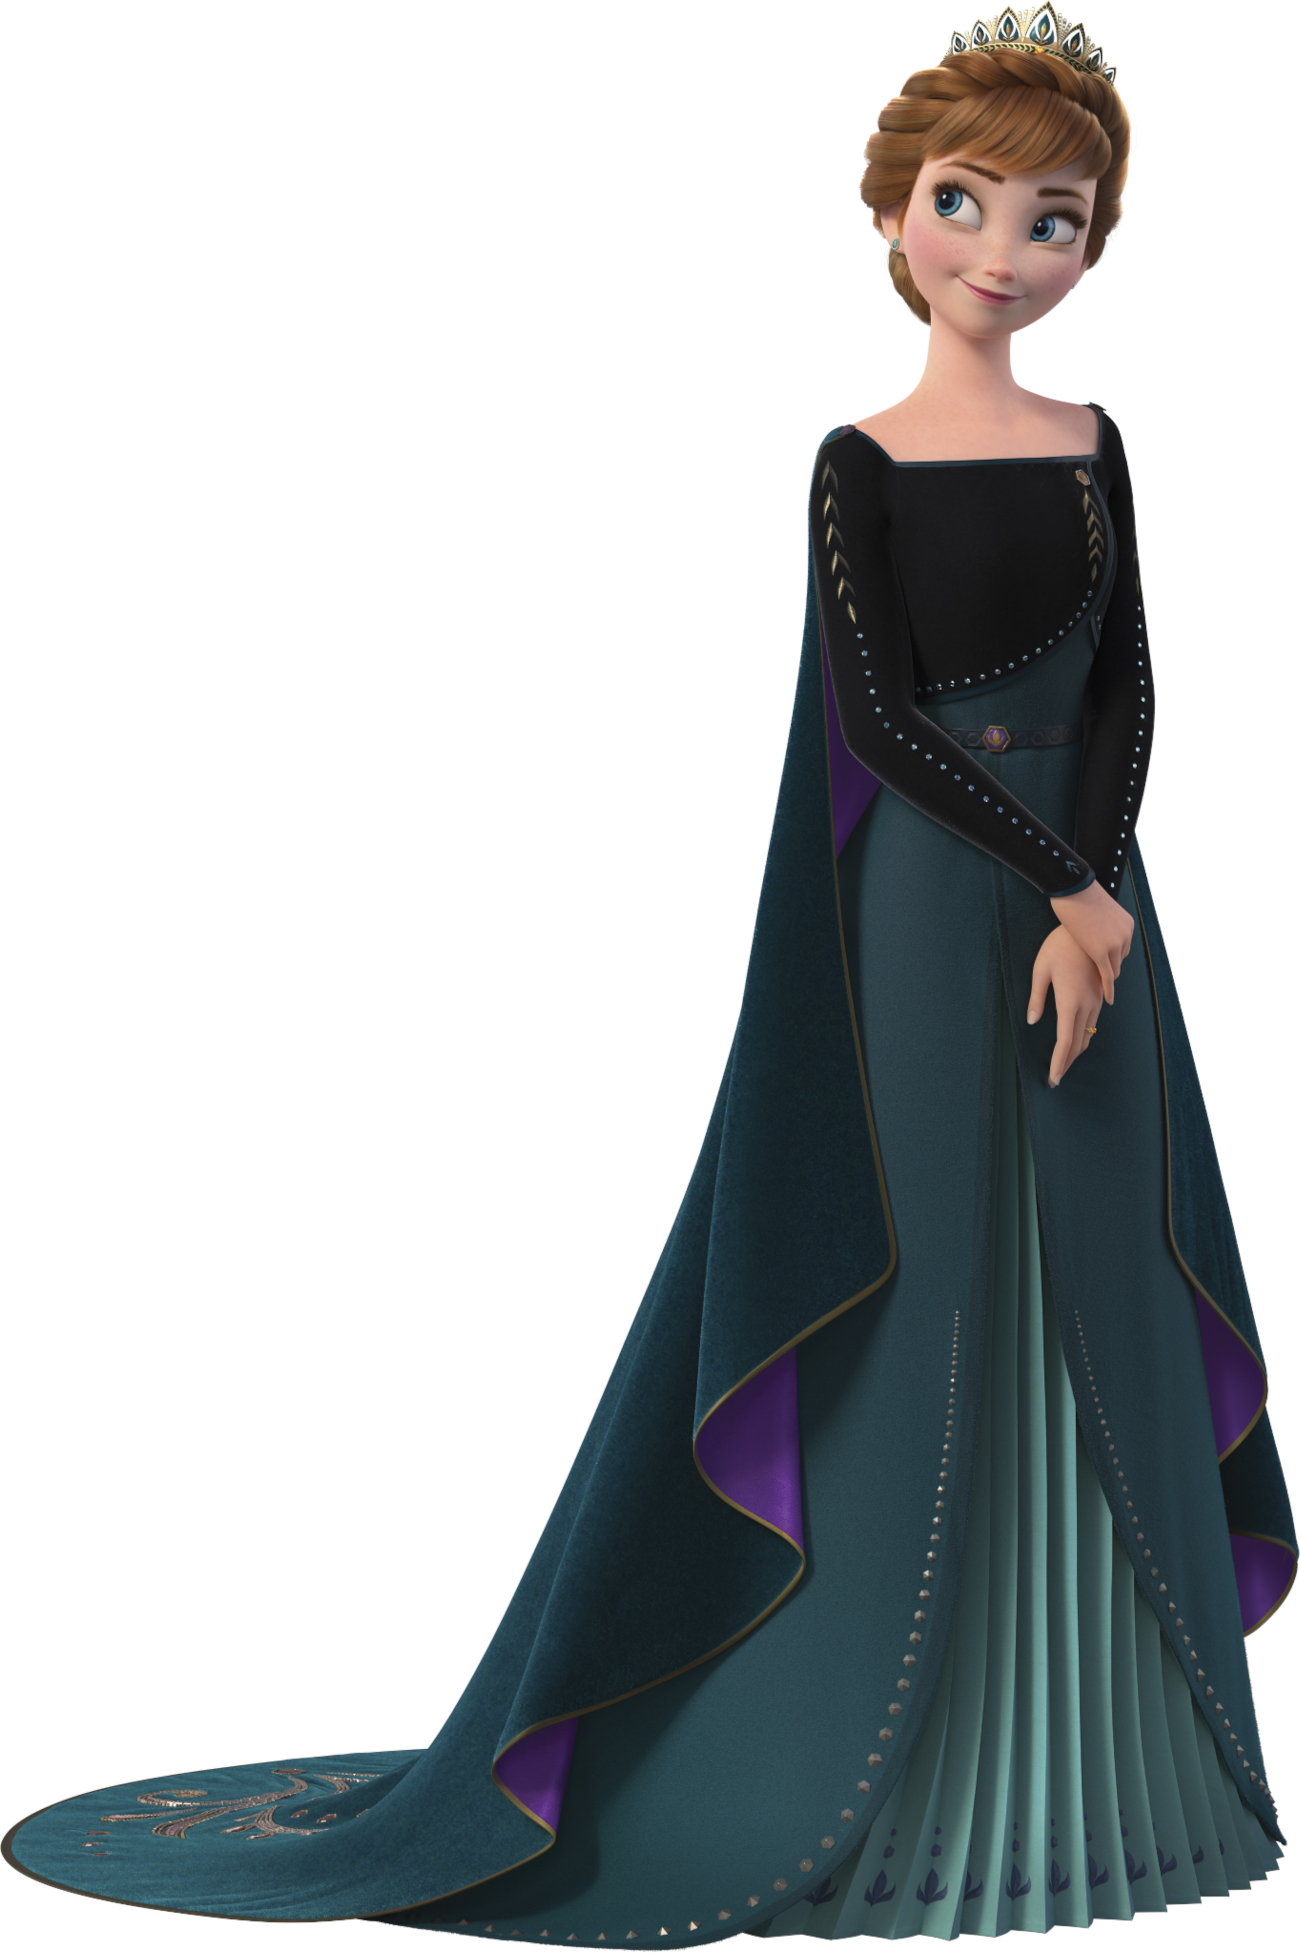 New HD images of Frozen 2 Anna Queen of Arendelle (with Kristoff!) and Elsa  as Snow Queen 